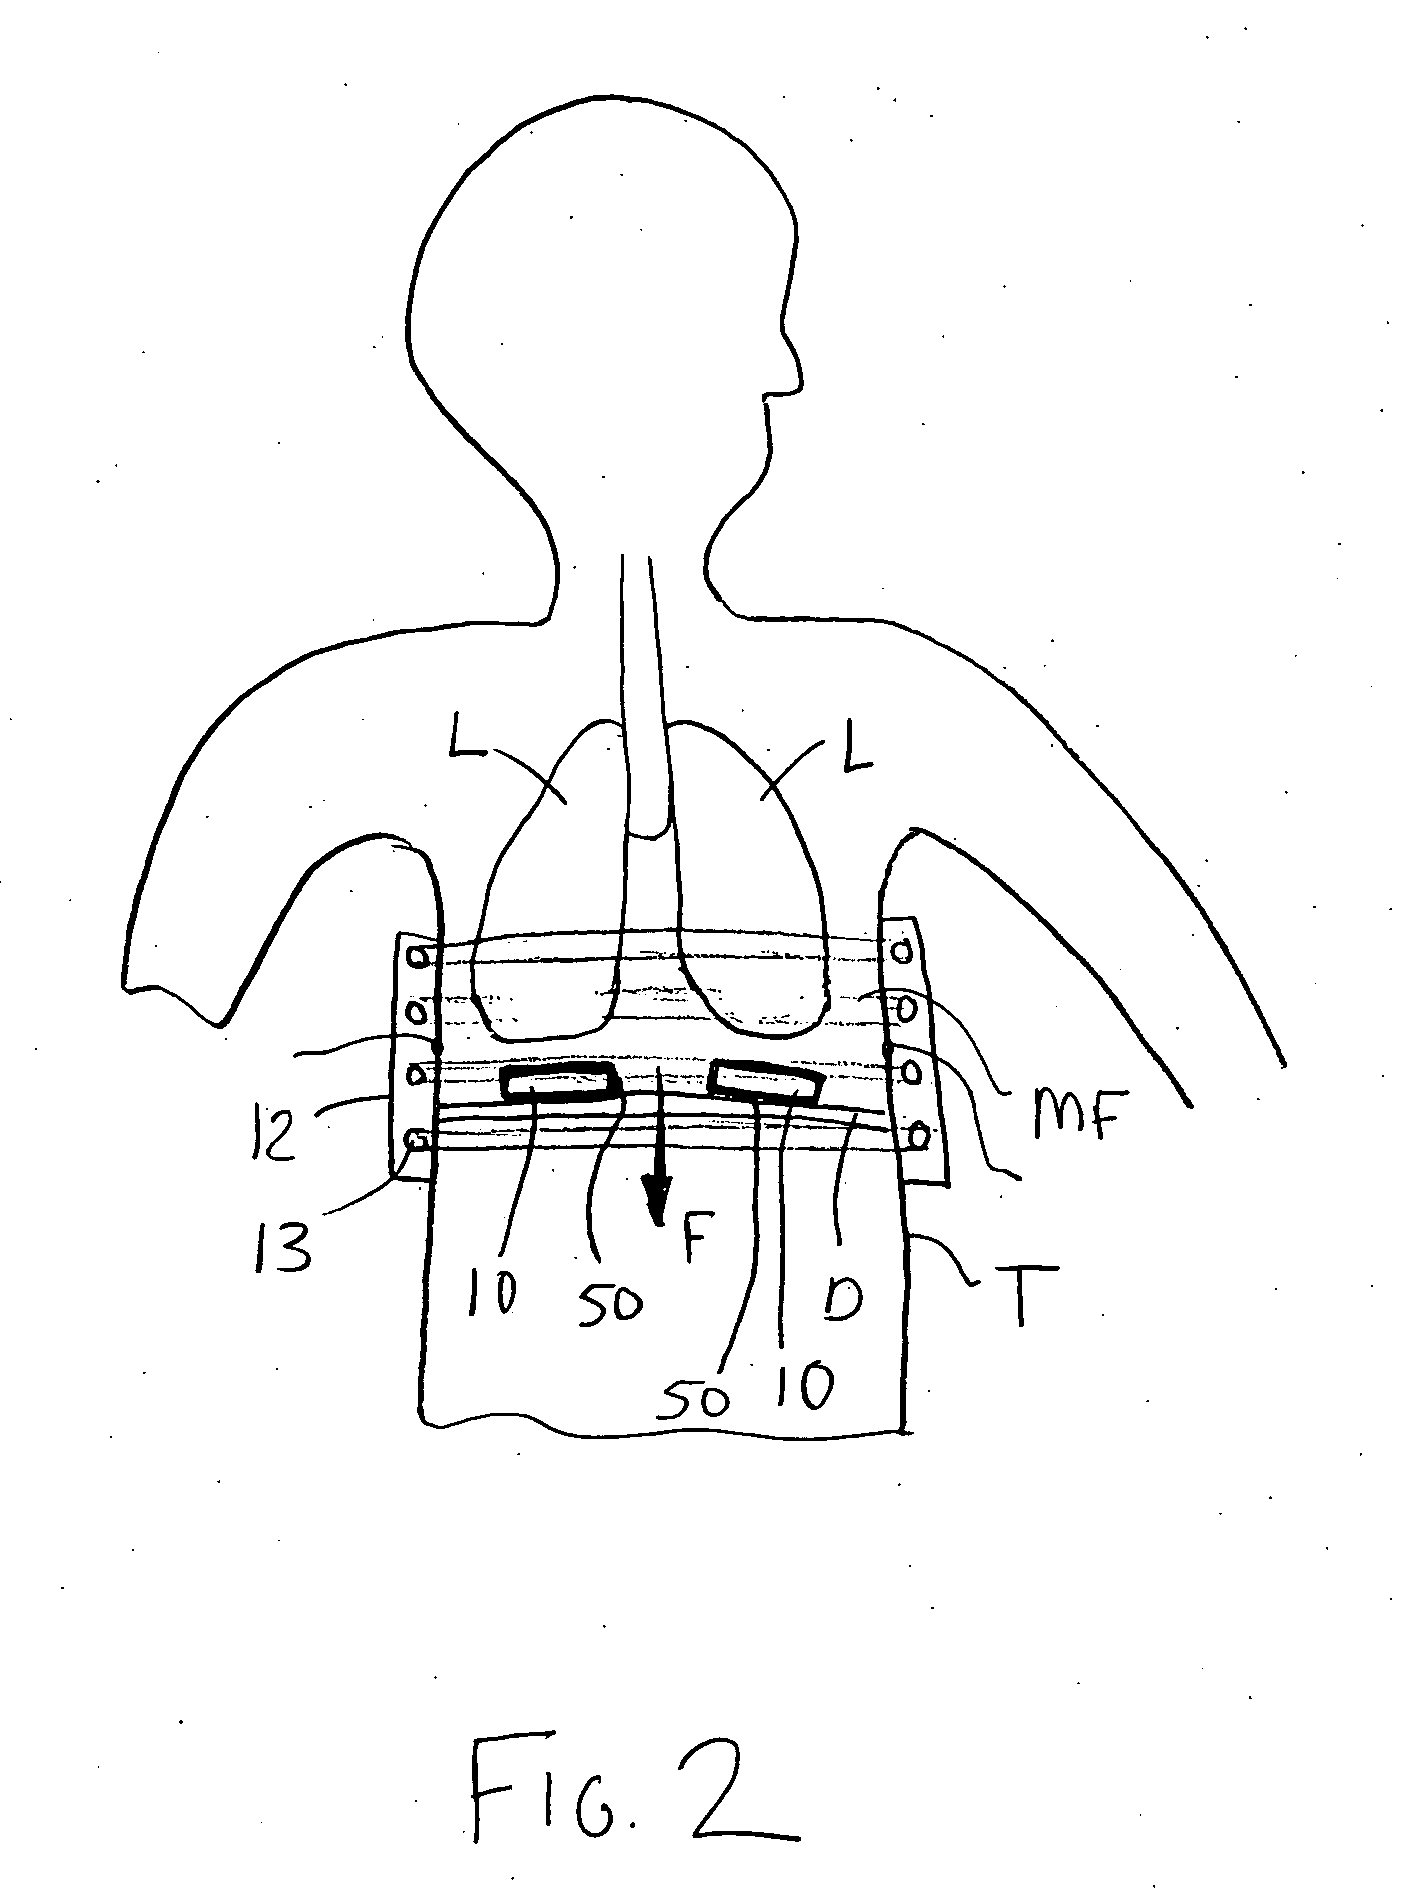 Electromagnetic diaphragm assist device and method for assisting a diaphragm function